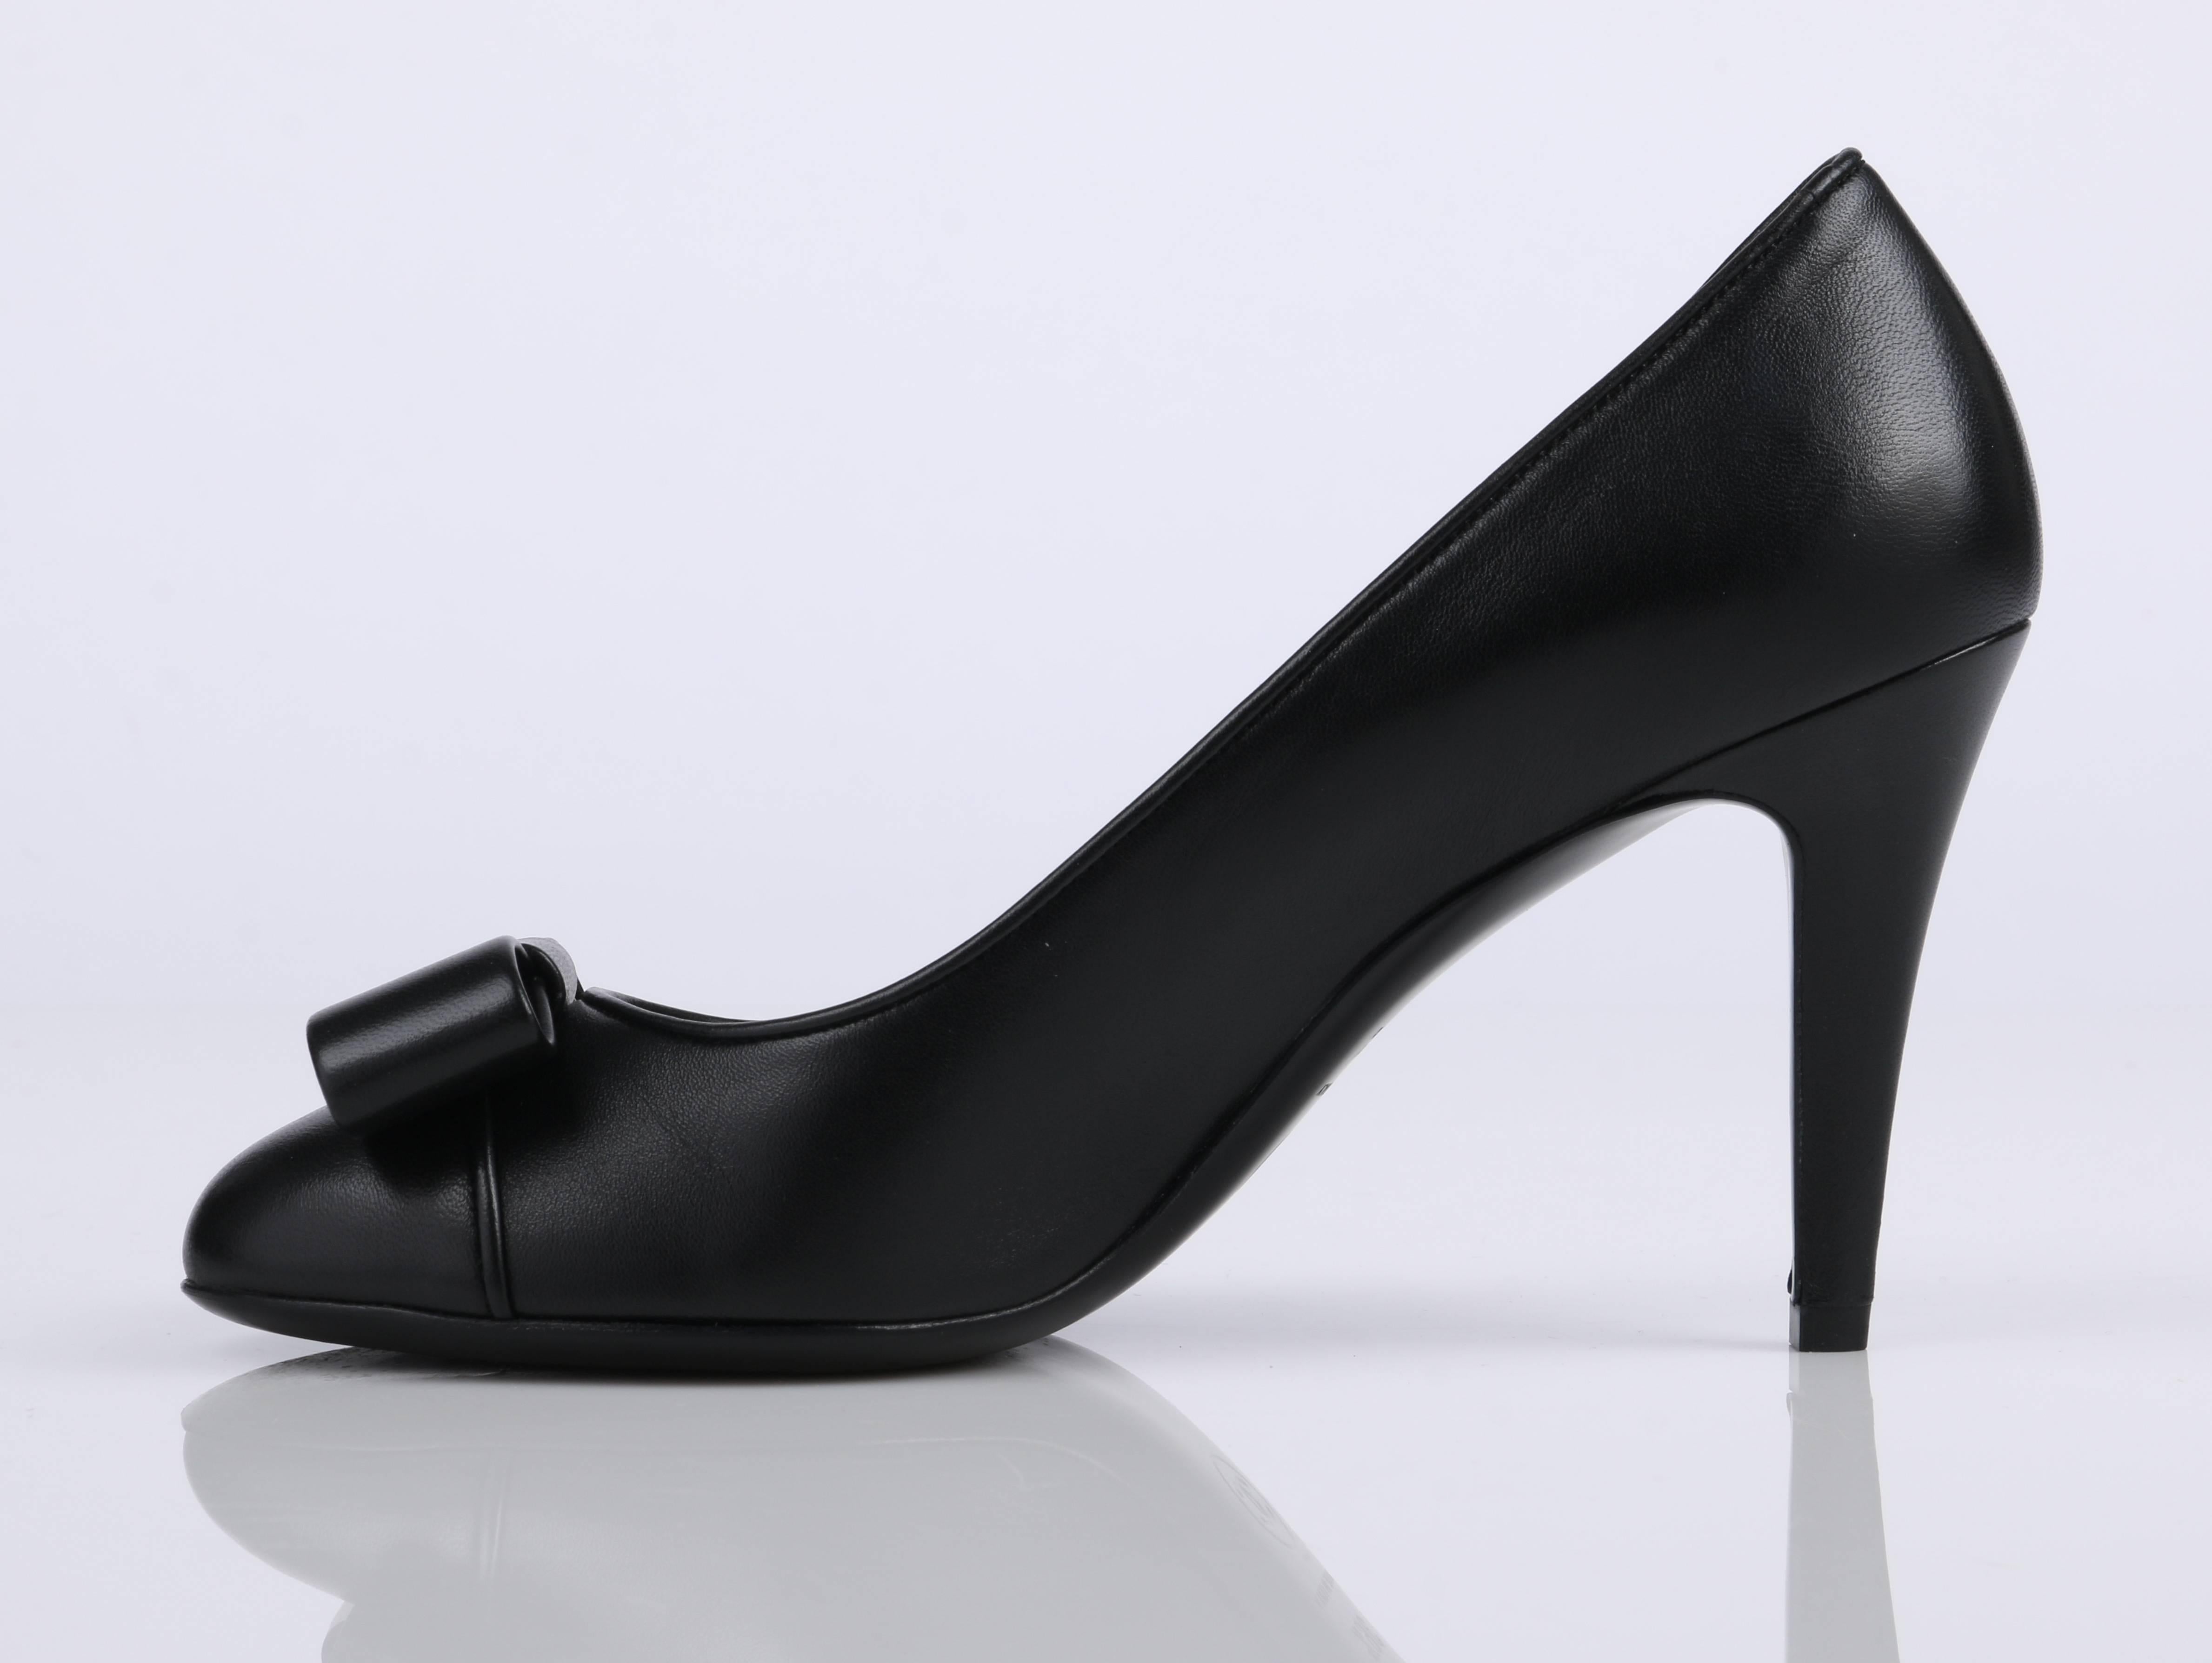 Chanel S/S 2015 classic black leather heels. Smooth black leather with black leather cap toe. Rounded toe detailed with contemporary flat black leather bow. Outside heel detailed with small silver tone 